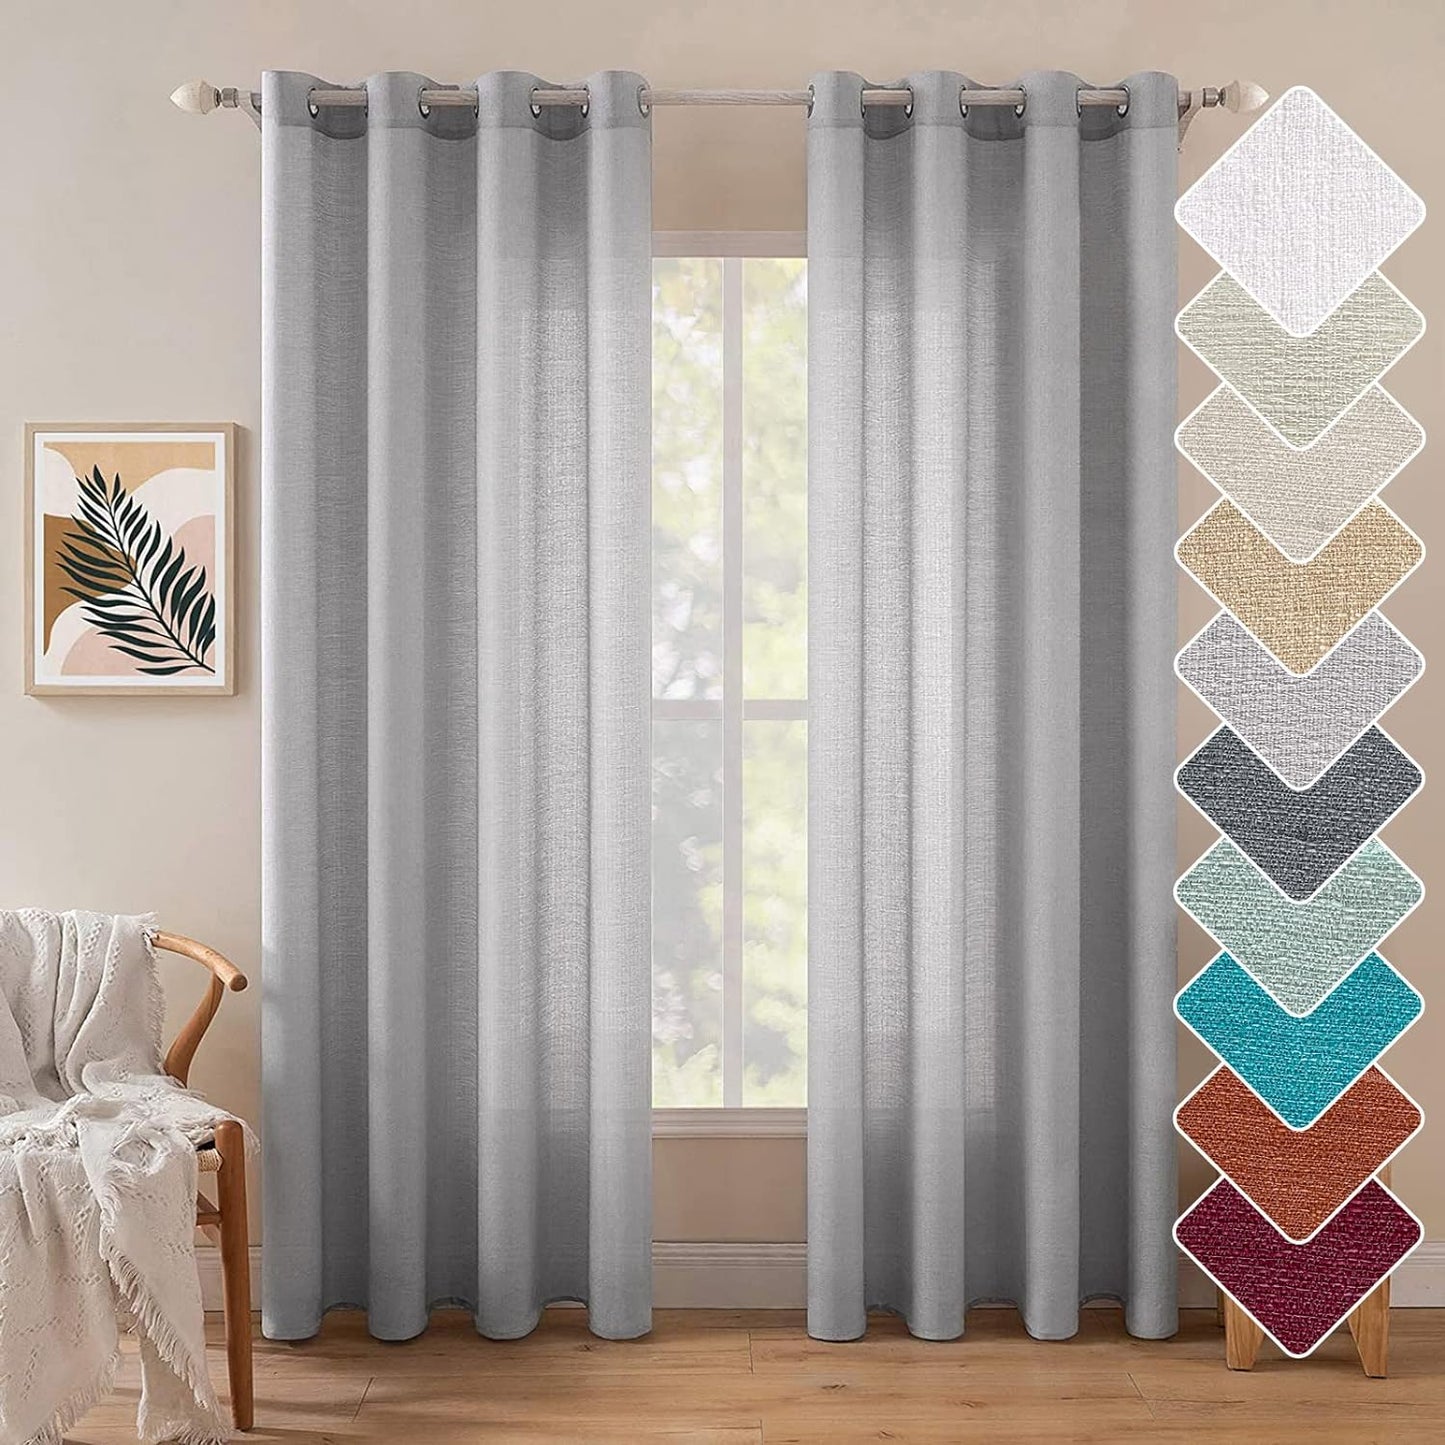 MIULEE Burnt Orange Linen Semi Sheer Curtains 2 Panels for Living Room Bedroom Linen Textured Light Filtering Privacy Window Curtains Terracotta Grommet Drapes Rust Boho Fall Decor W 52 X L 84 Inches  MIULEE Grommet | Silver Grey W52 X L84 